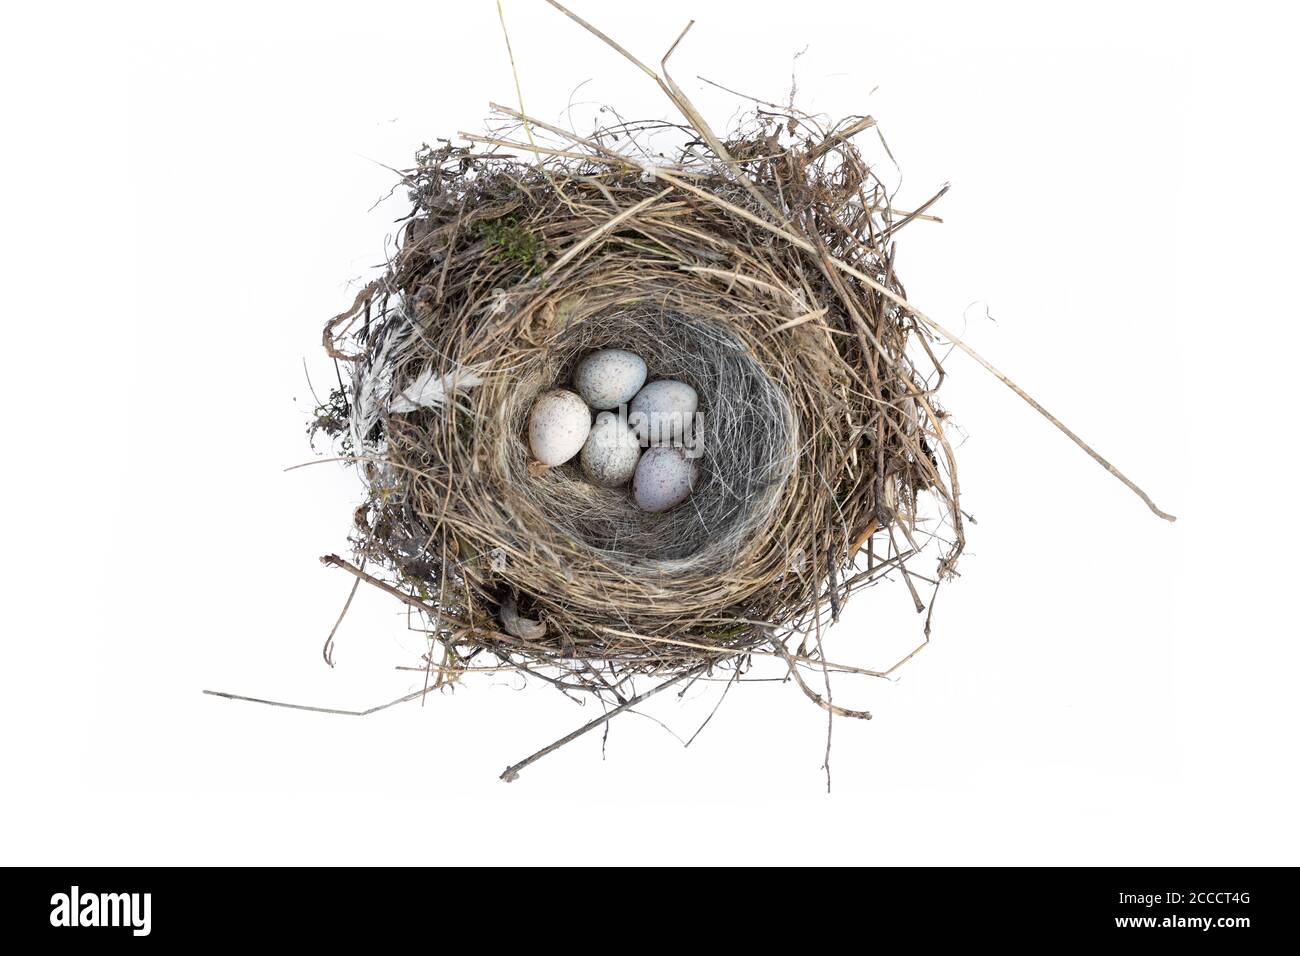 Wagtail eggs in a nest isolated on a white background Stock Photo